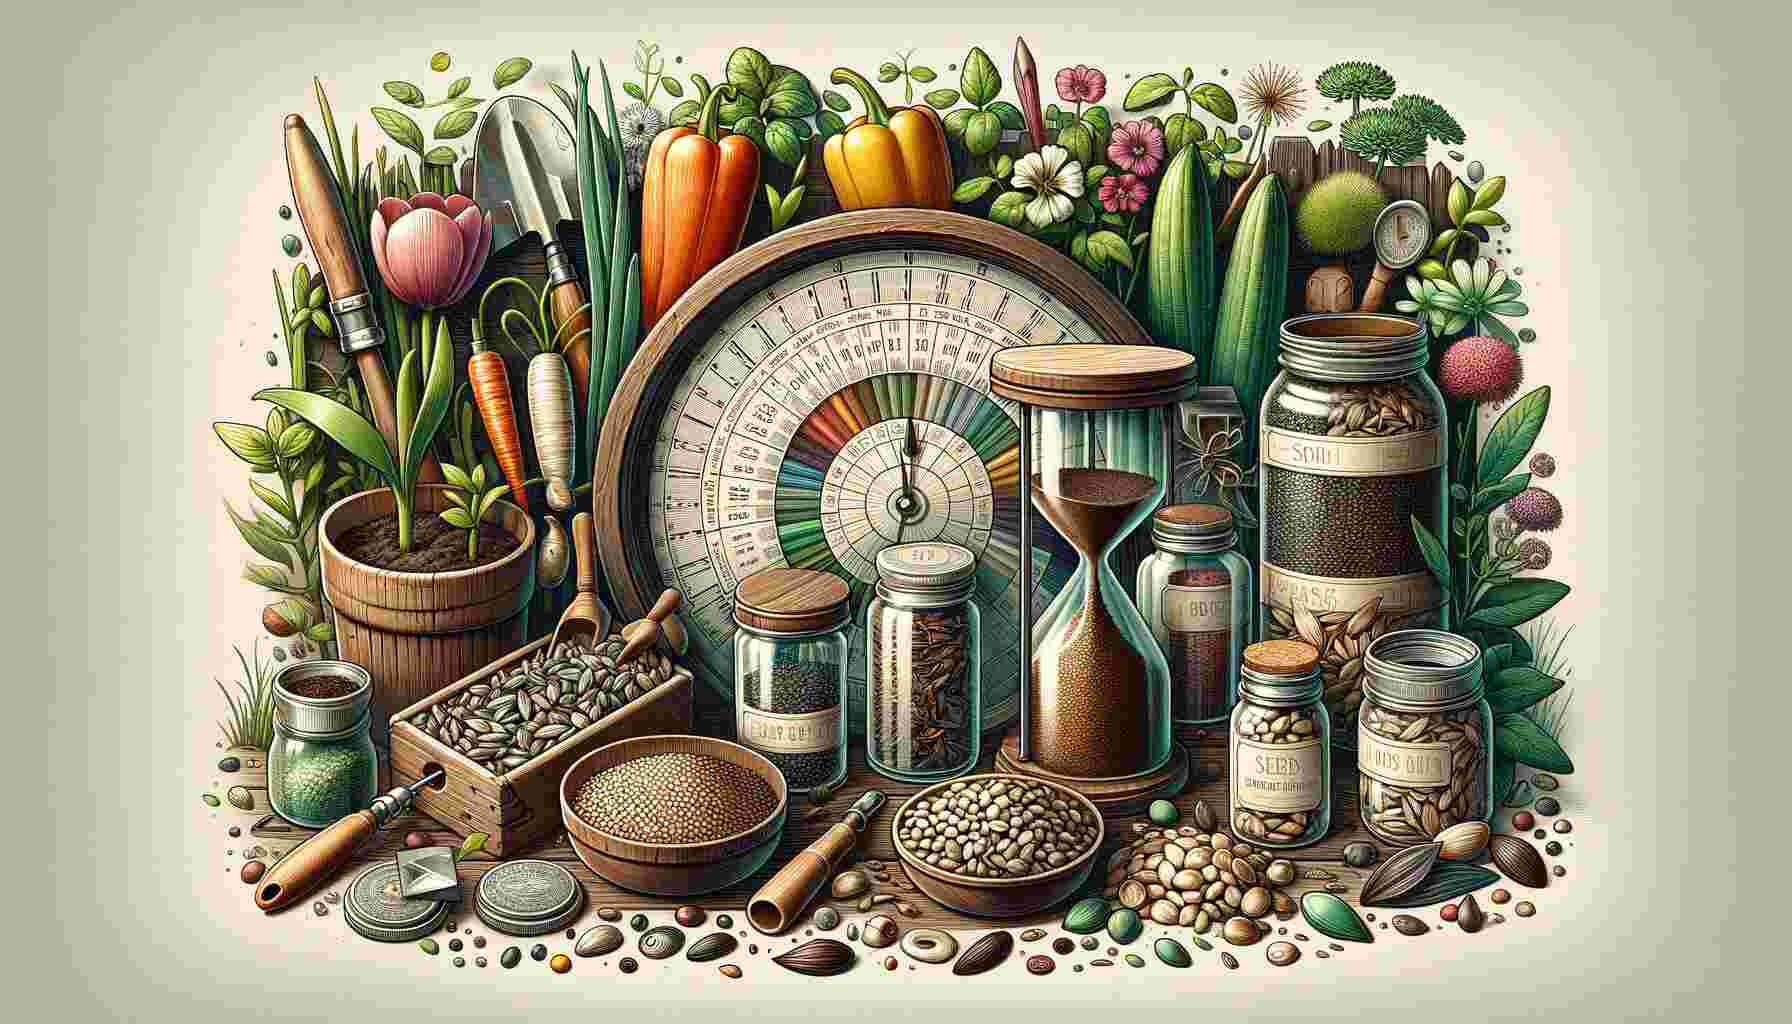 The featured image for the article Do Gardening Seeds Expire: Exploring The Lifespan of Seeds. has been created. It visually represents the theme of the article, showcasing a variety of gardening seeds in different states of preservation against a backdrop that includes elements of gardening.